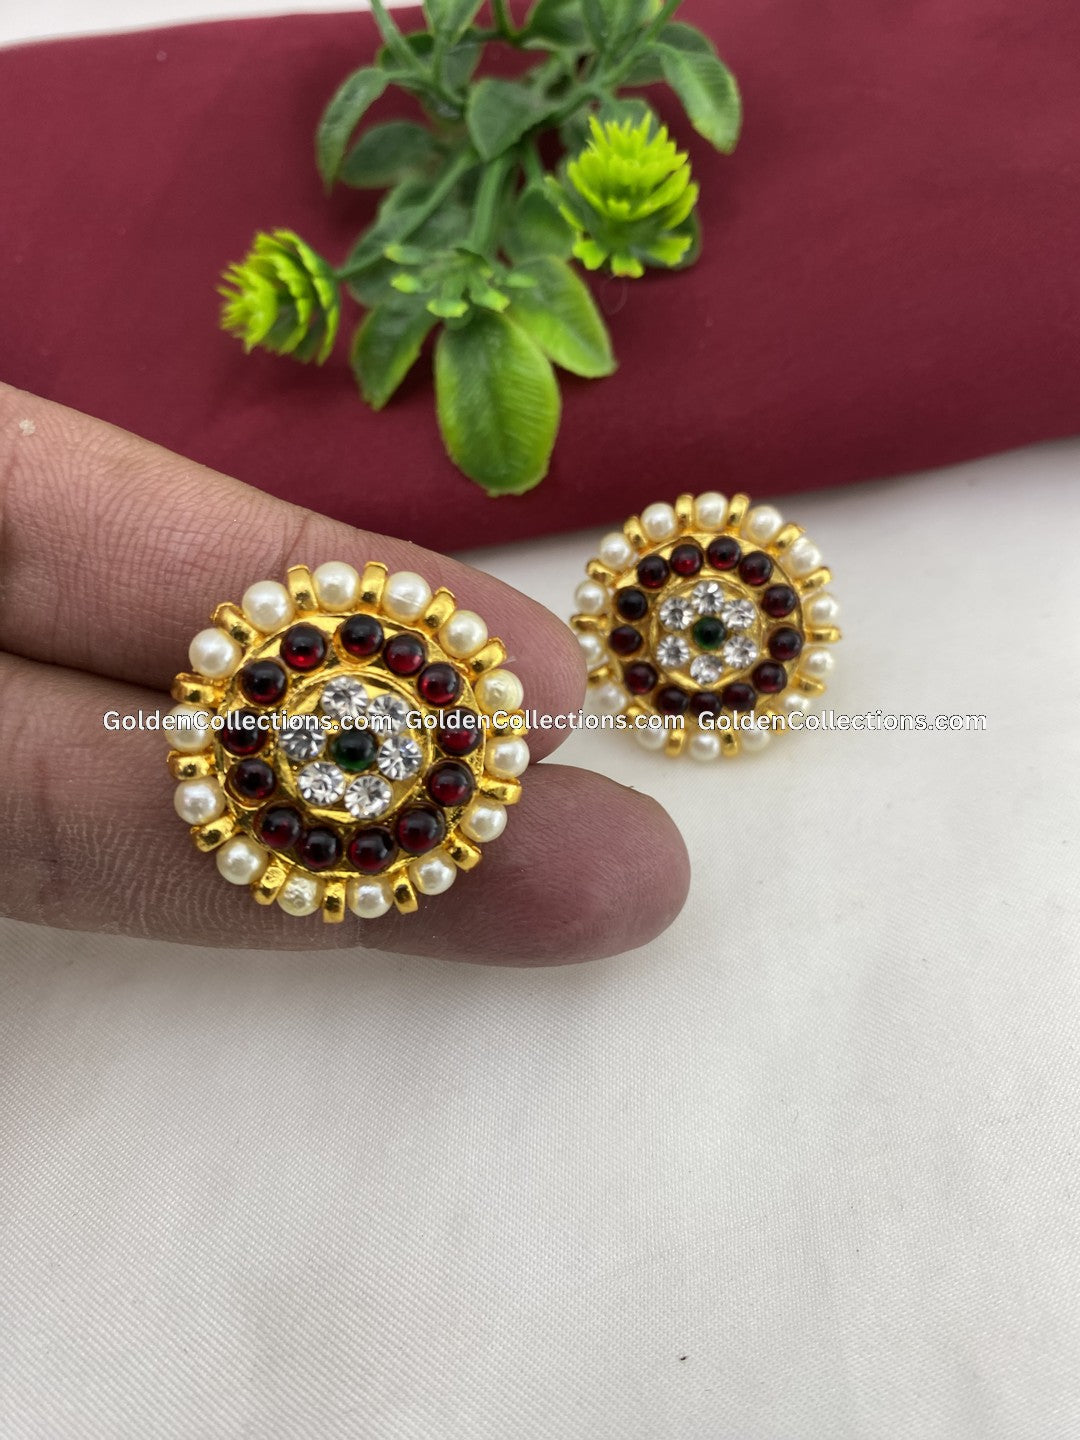 Temple Jewelry Earrings - GoldenCollections BJE-014 2